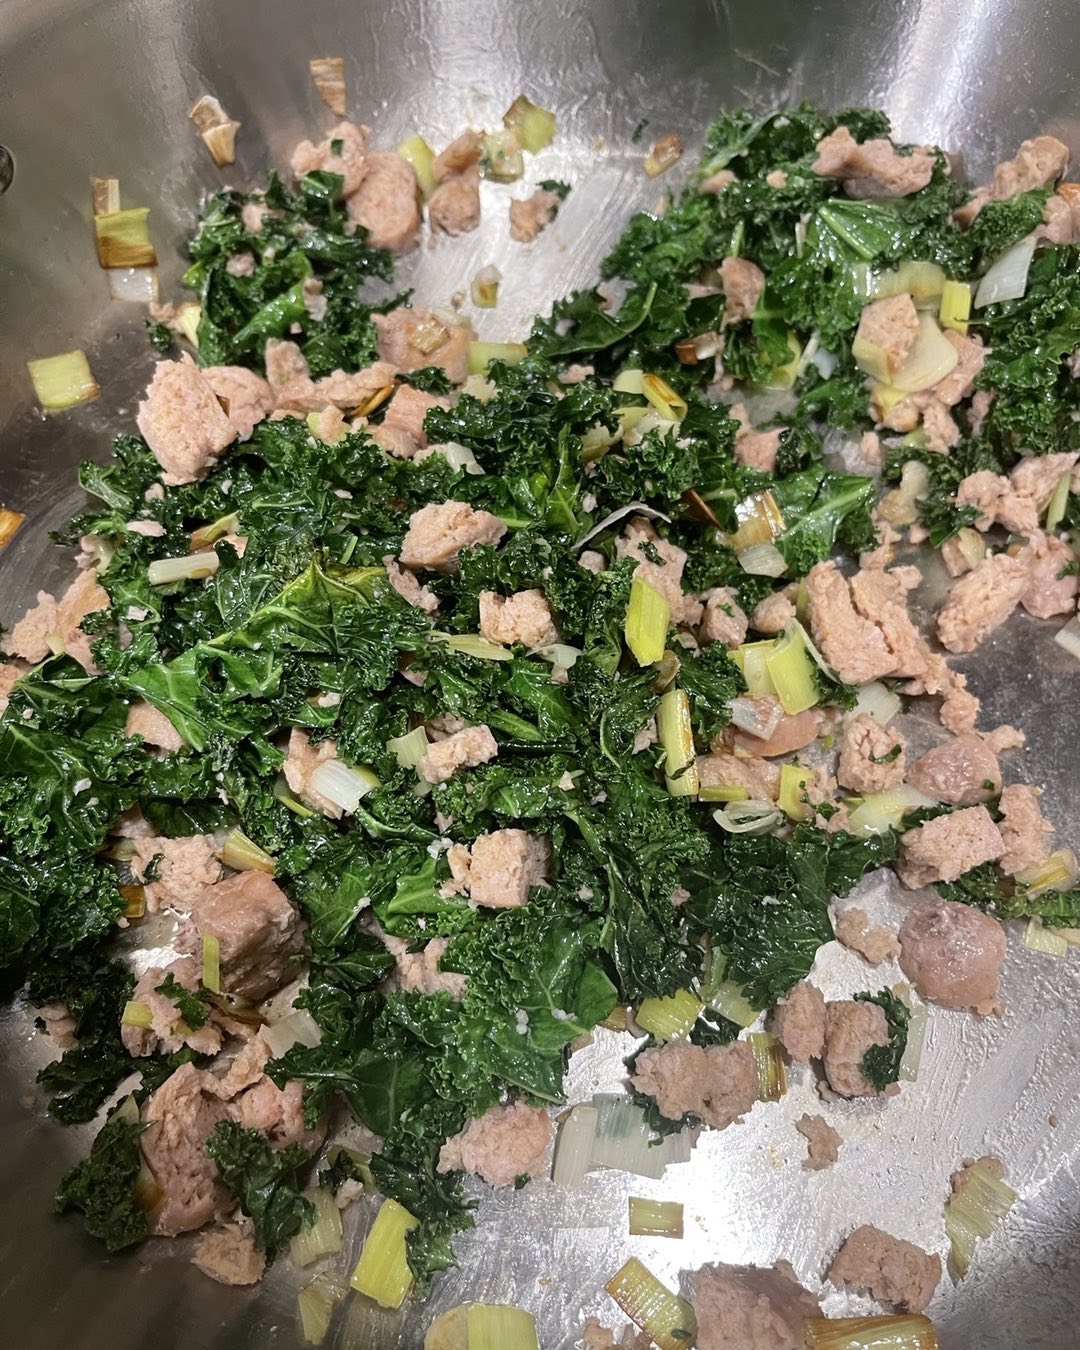 I hate throwing away food so tonight I’m making a stir fry out of some kale, leeks, leftover turkey sausage and rice.  I’ll throw in an egg and there’s an easy dinner with a bunch of stuff that didn’t get wasted.